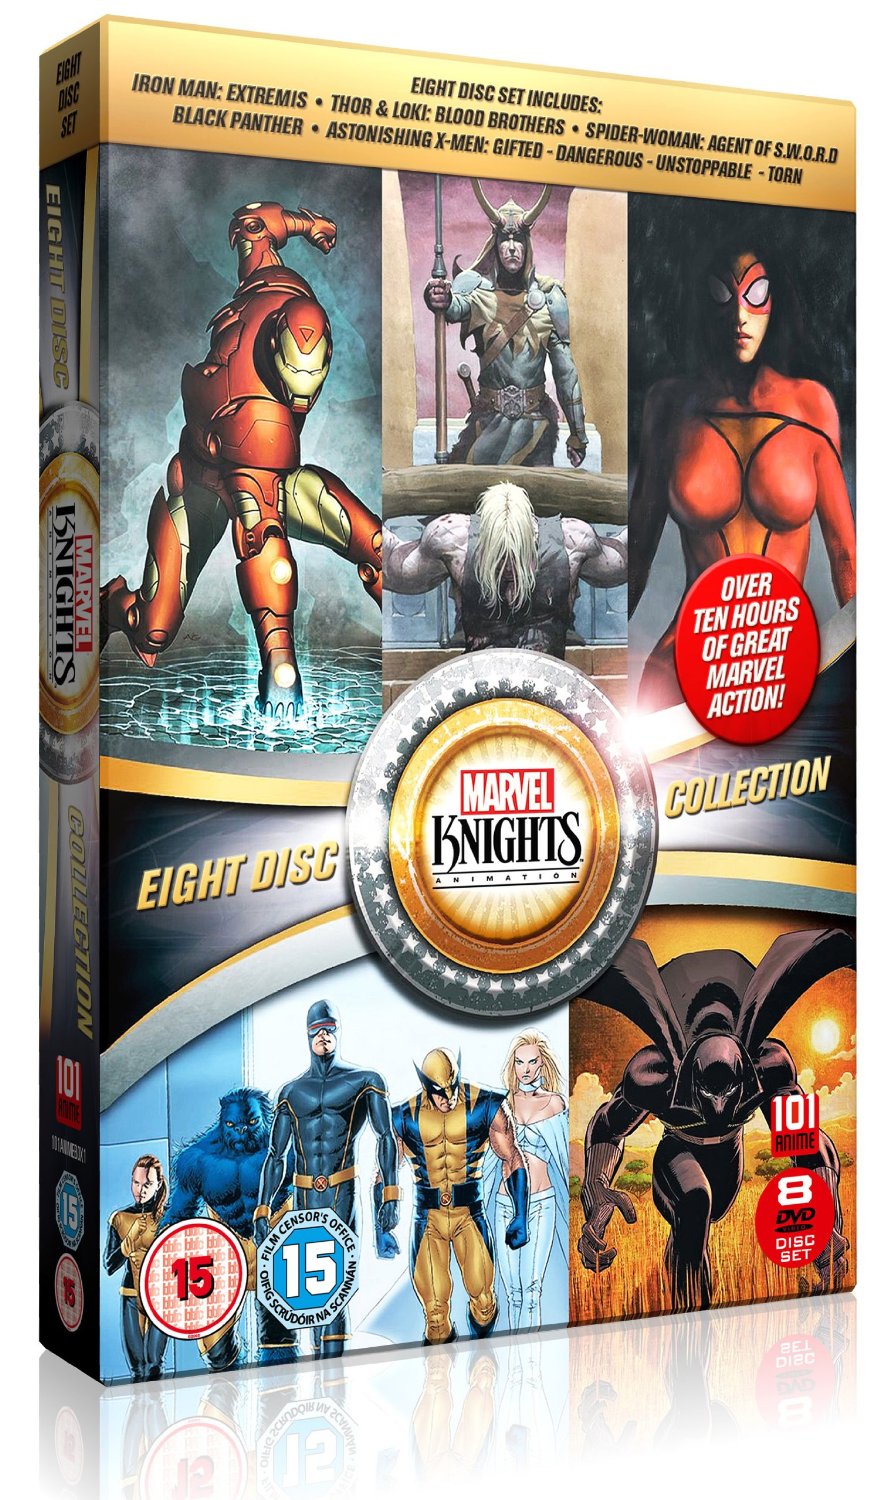 Marvel Knights Collection [DVD]